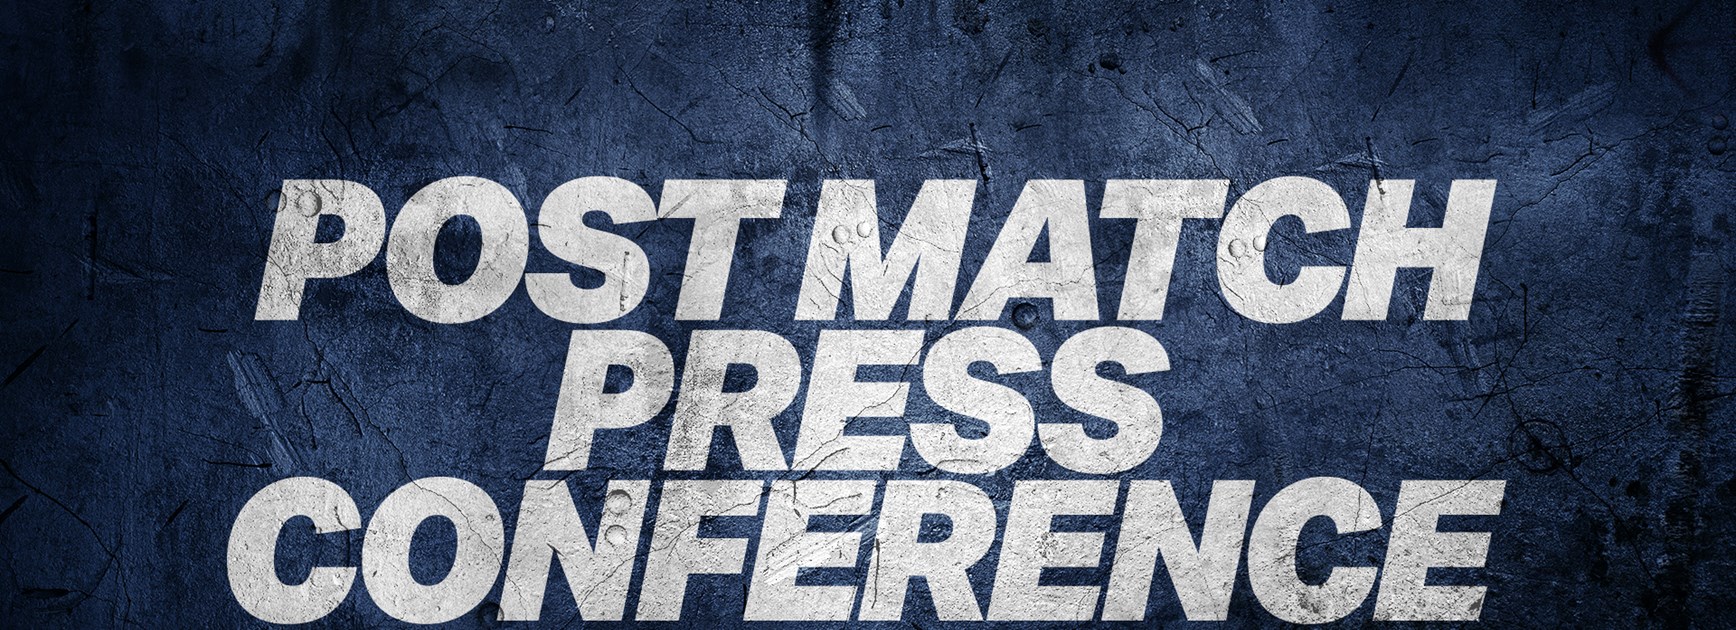 Watch: All four Saturday press conferences